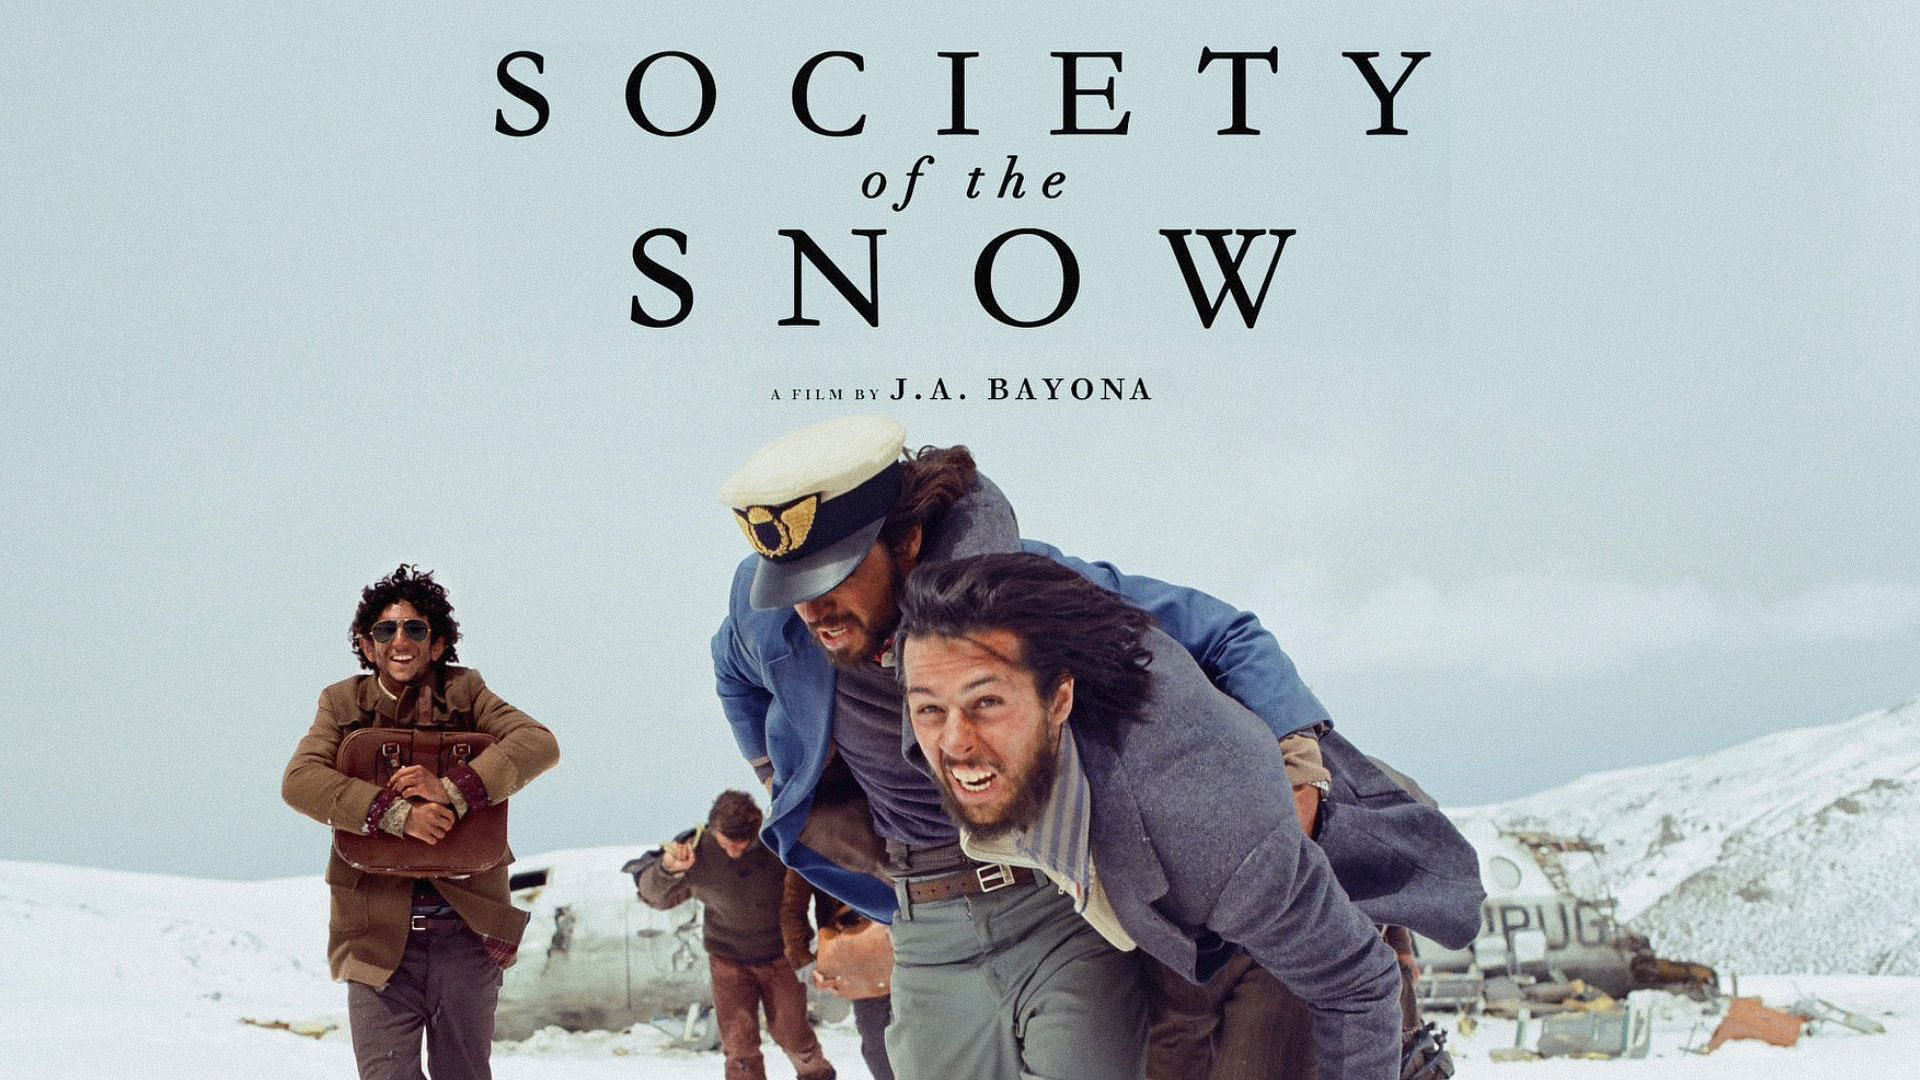 Society of the Snow Review: Is the Netflix film worth a watch?